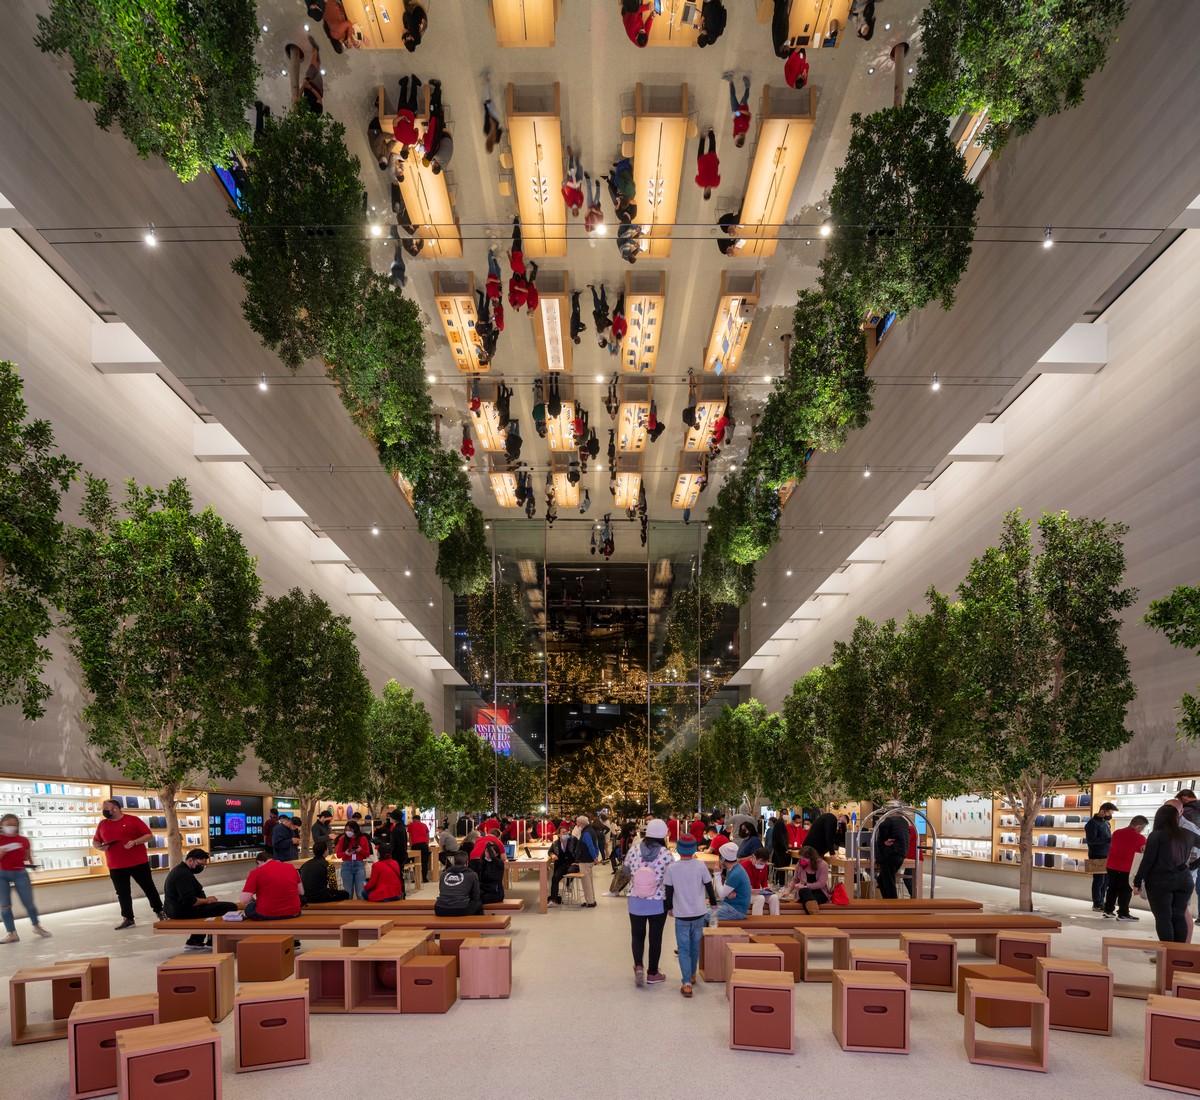 The reimagined Apple The Grove now open in Los Angeles - Apple (CA)